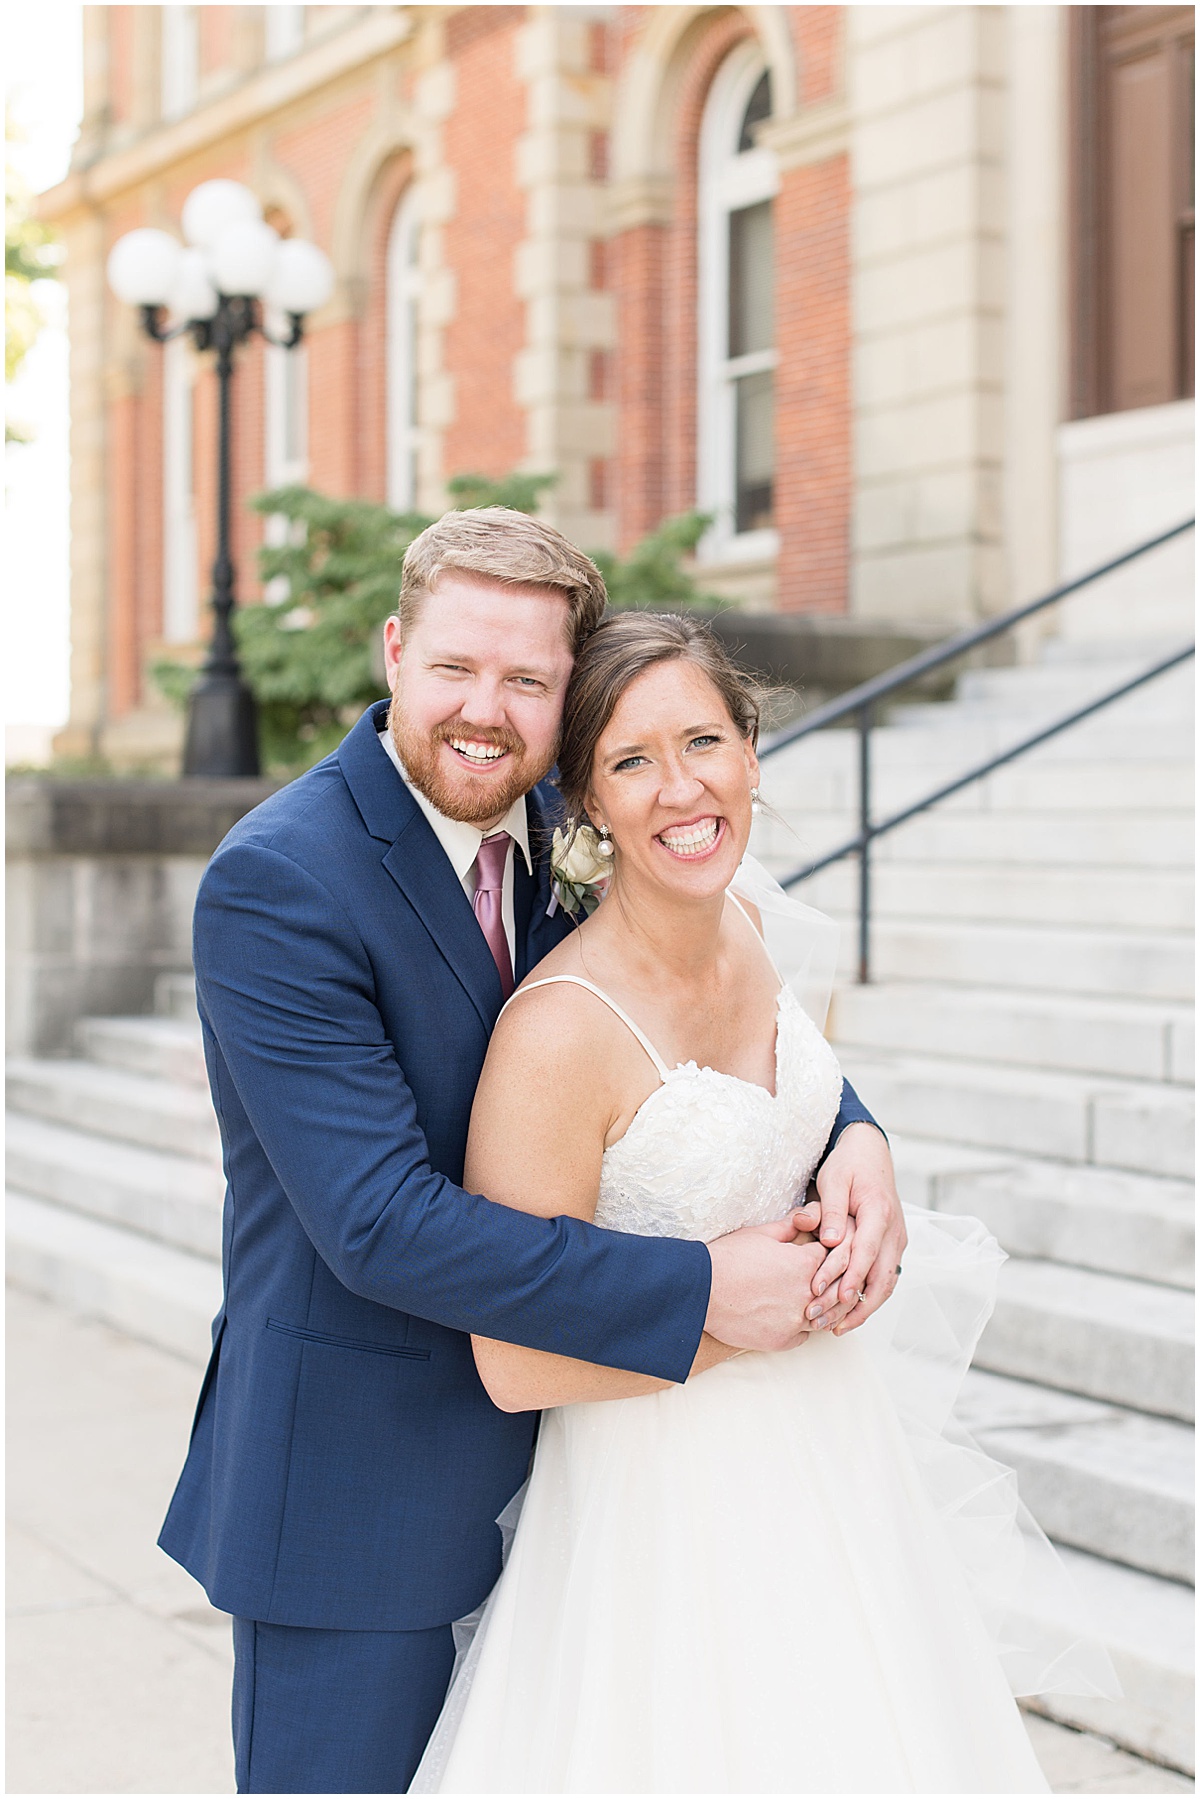 Just married photos after Spohn Ballroom wedding in Goshen, Indiana by Victoria Rayburn Photography